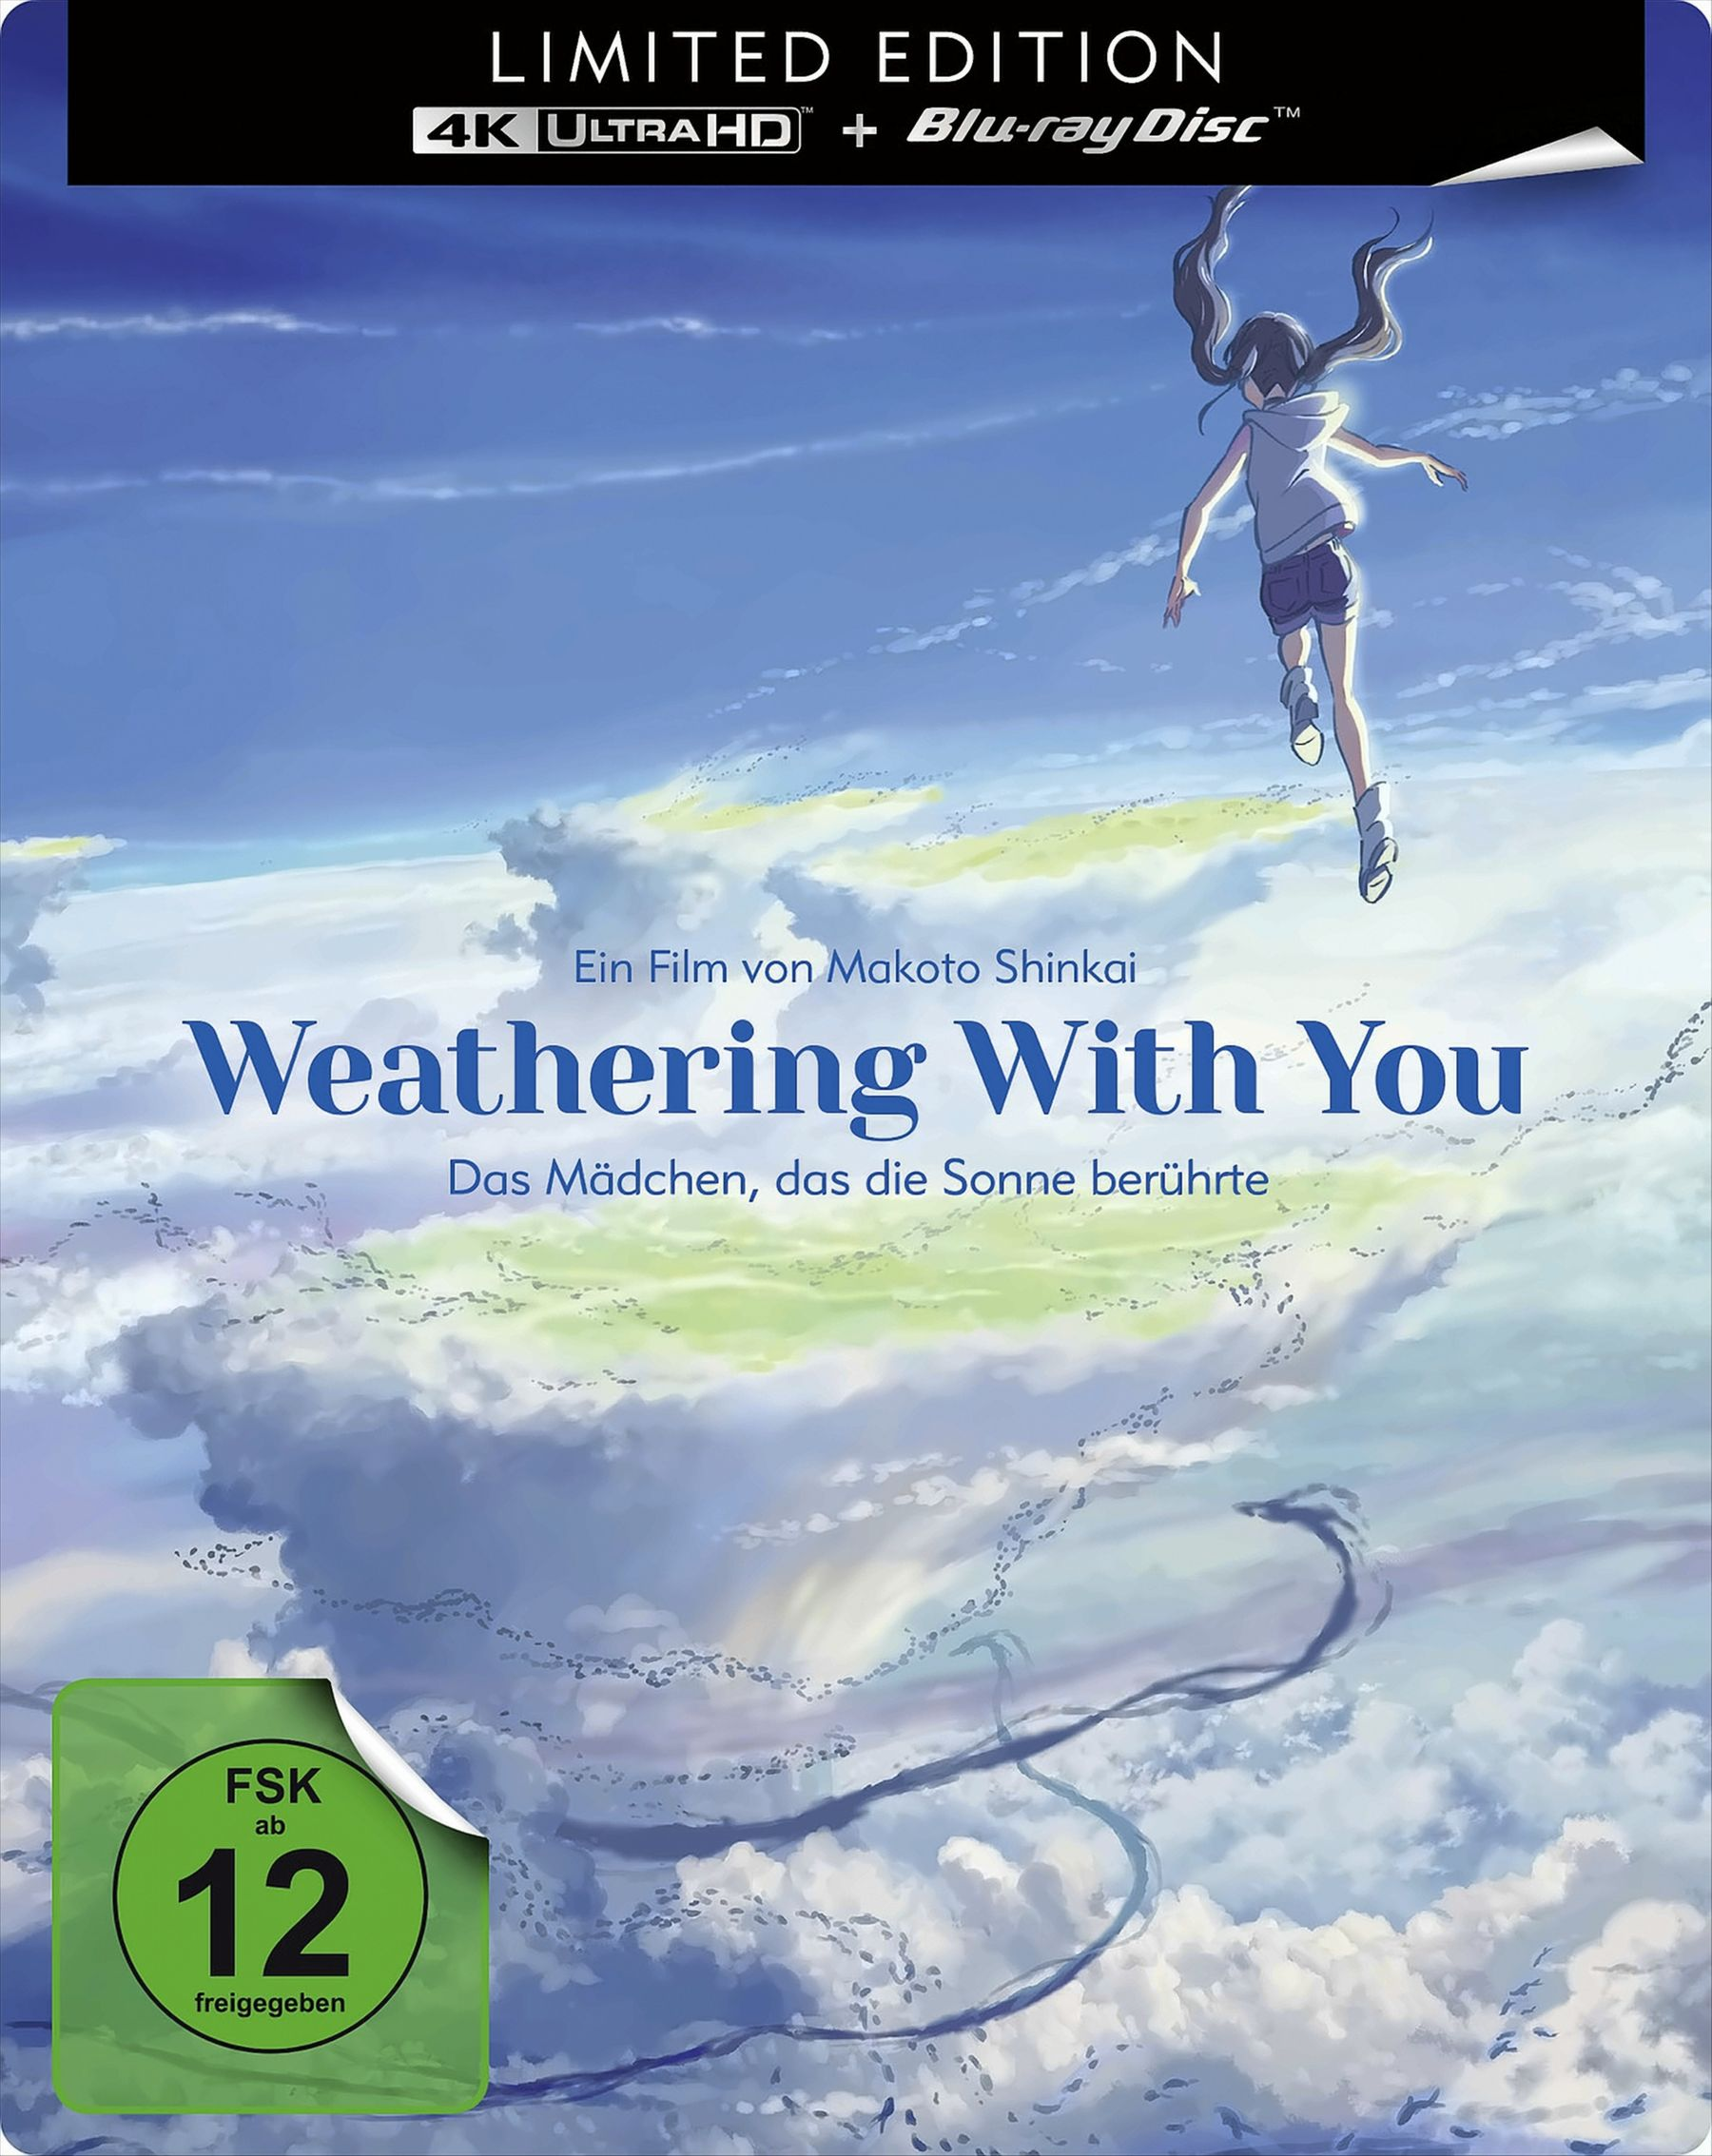 Weathering With Edition] (4K UHD) (Steelbook) - [Blu-ray] Blu-ray You [Limited